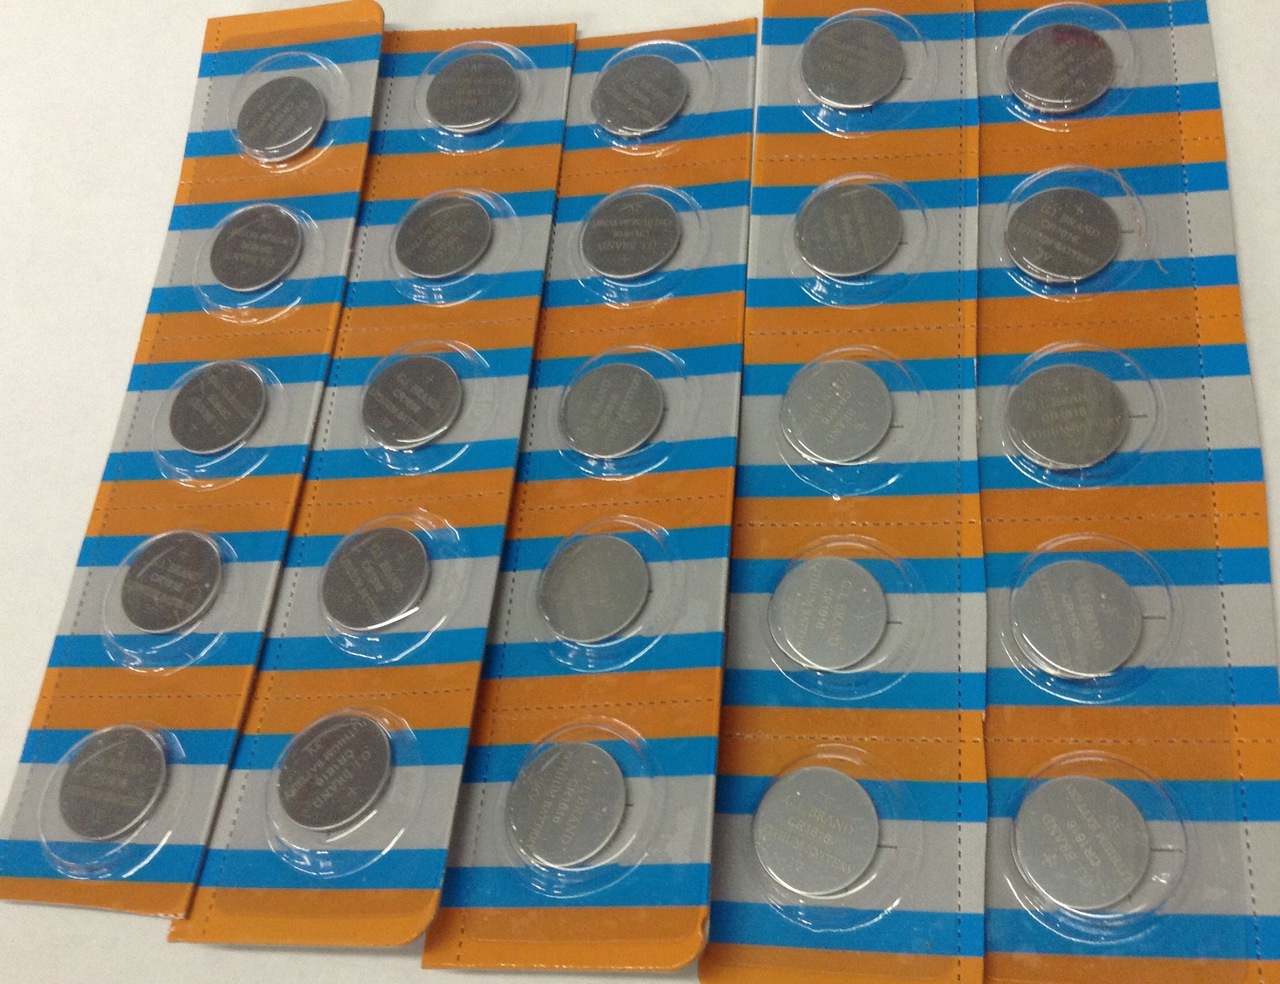 BBW CR1616 3V Lithium Coin Battery 25 Pack + FREE SHIPPING!